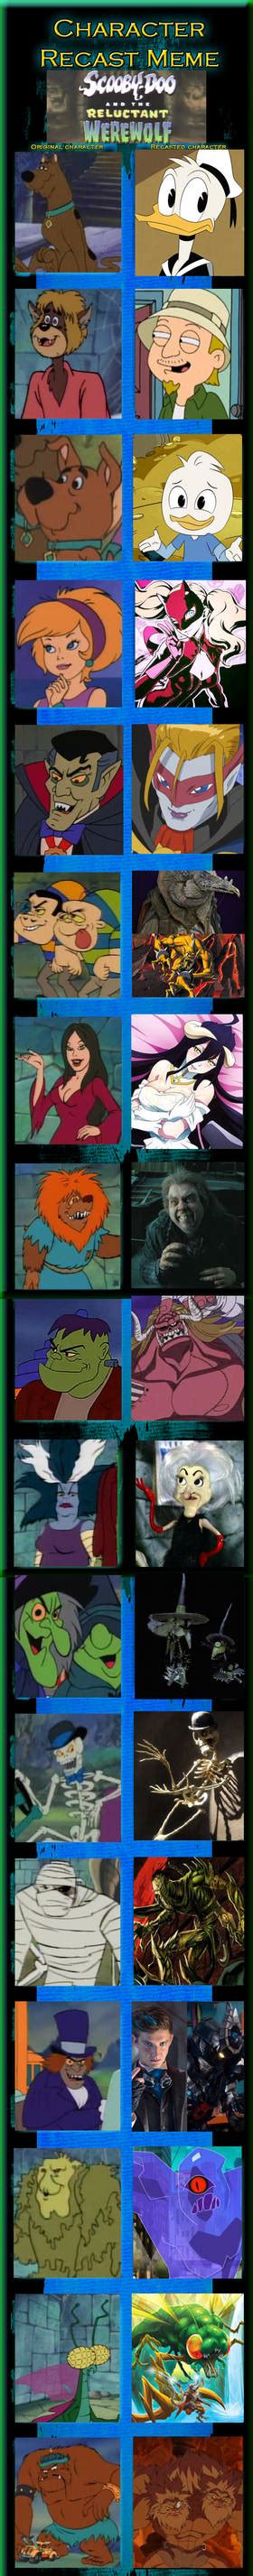 Scooby Doo And The Reluctant Werewolf Recast By Jackskellington416 On